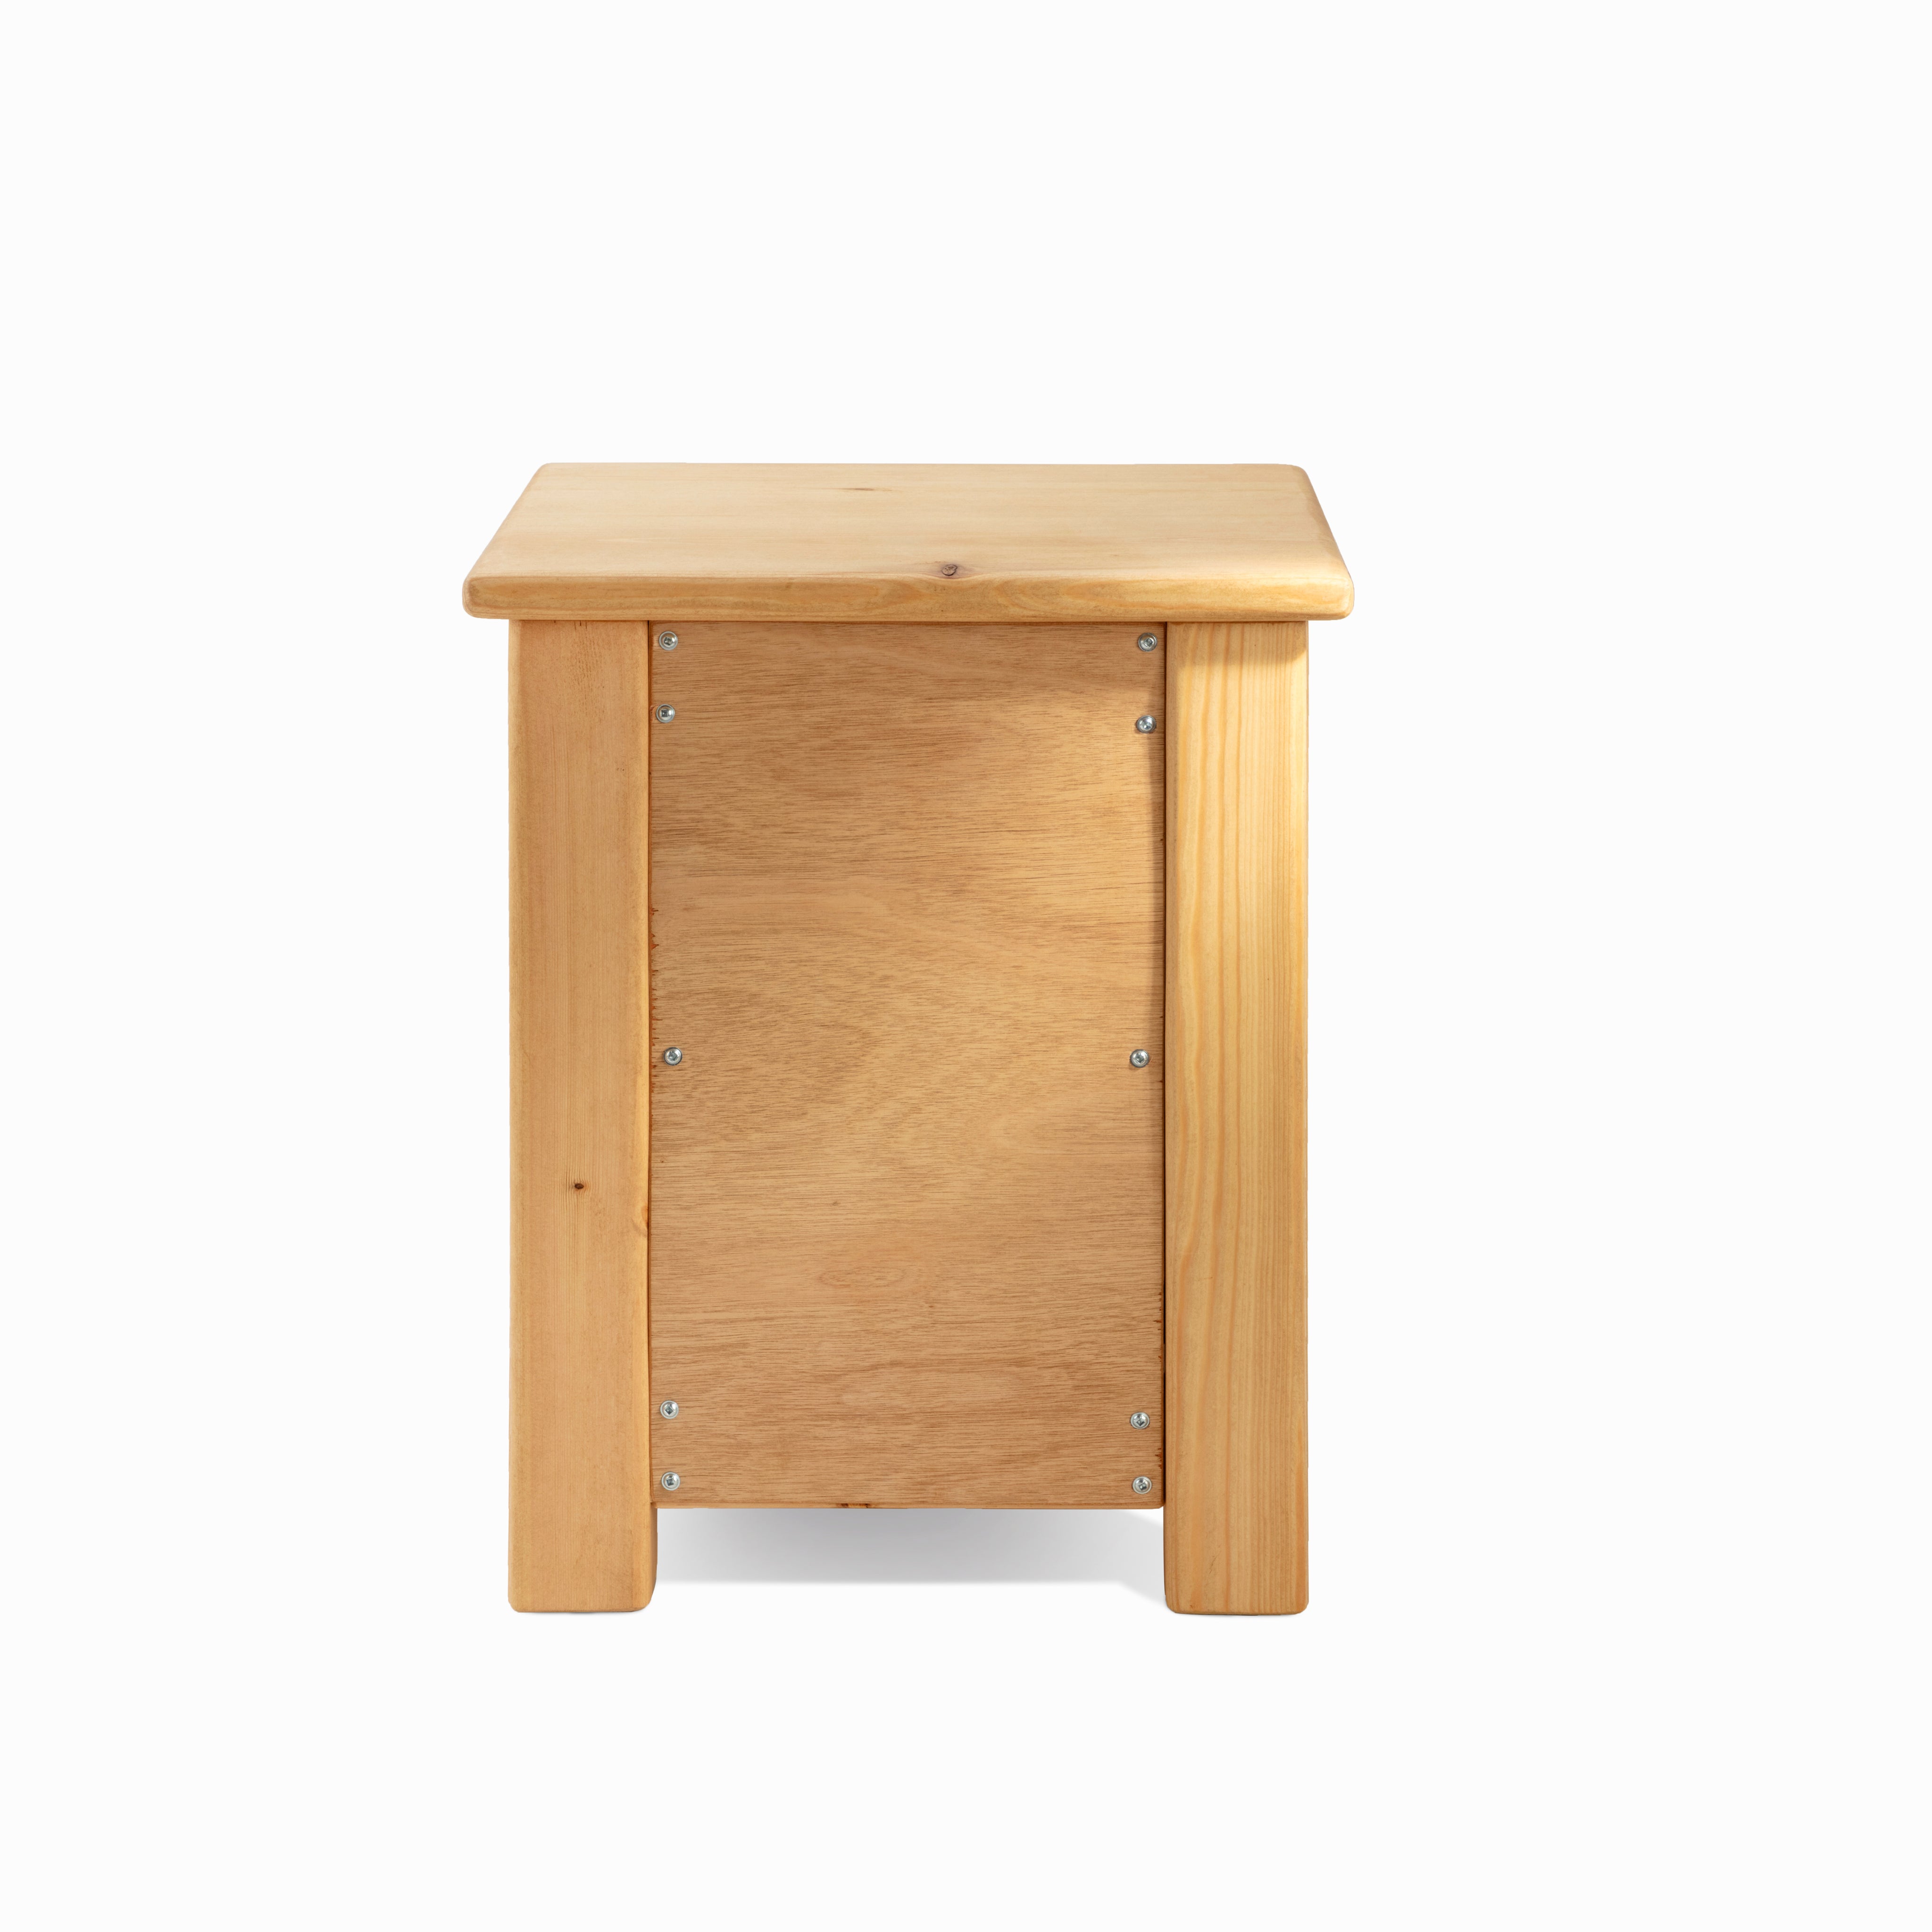 Lambton Bedside Table With Drawers - Outlet - Save 15%